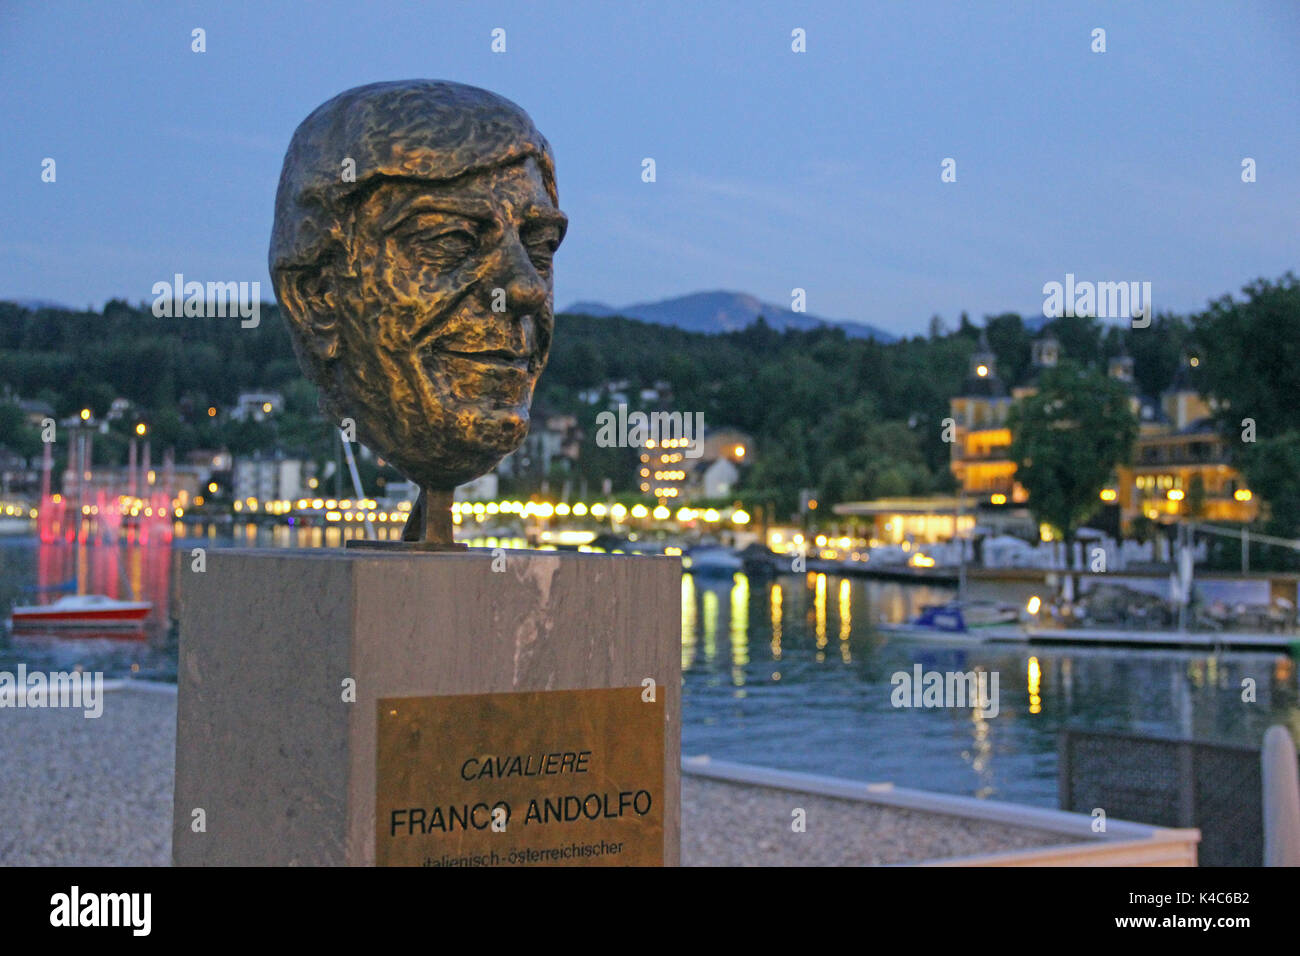 Bust Of Franco Andolfo In Velden Am Wörthersee In The Evening Stock Photo